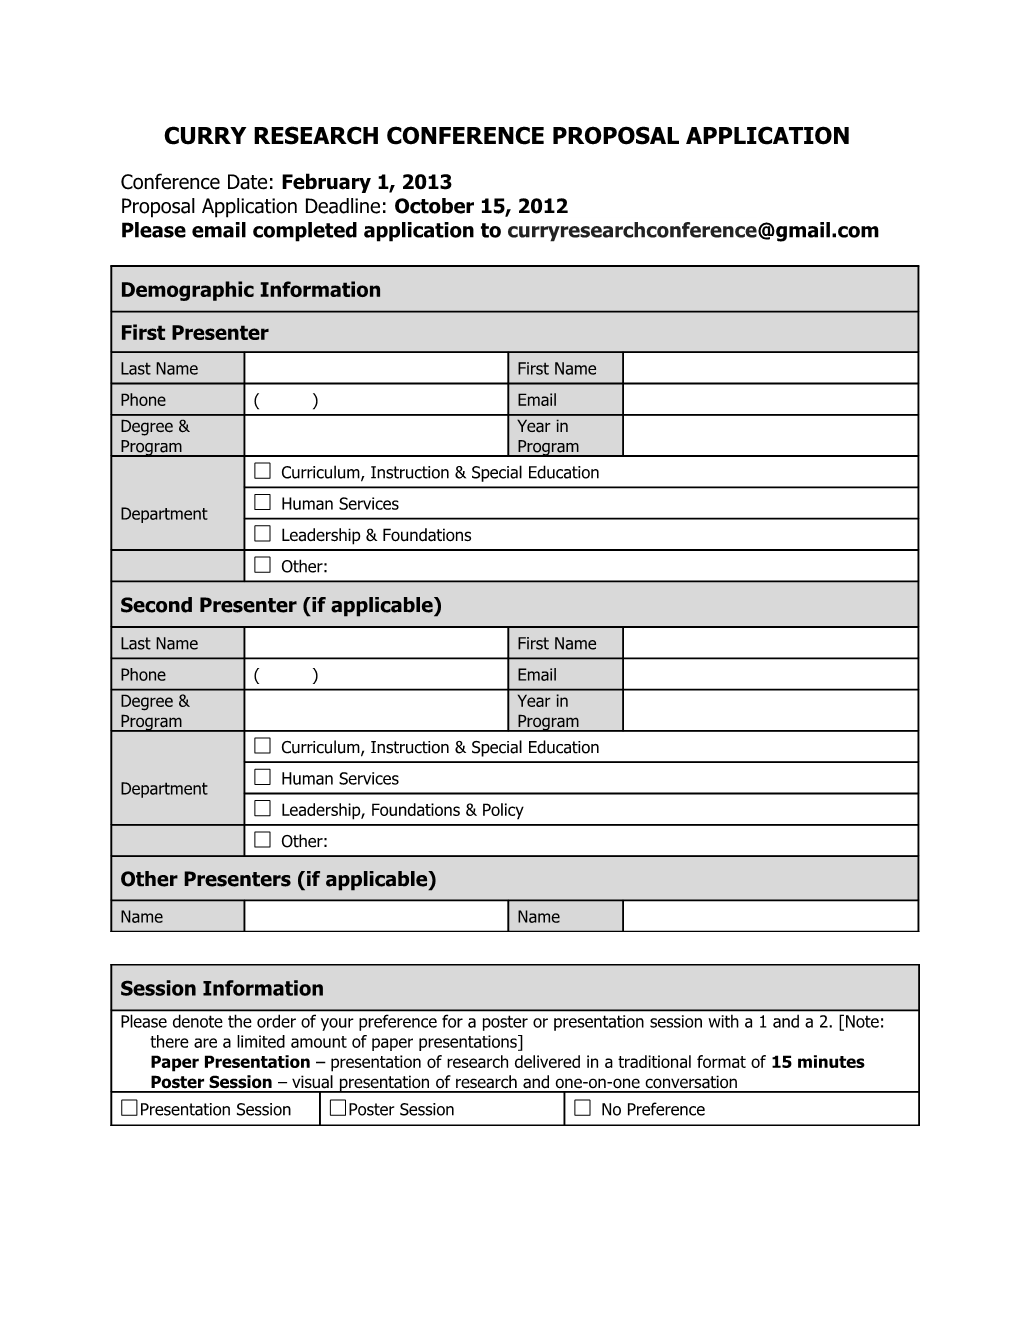 Curry Research Conference Application